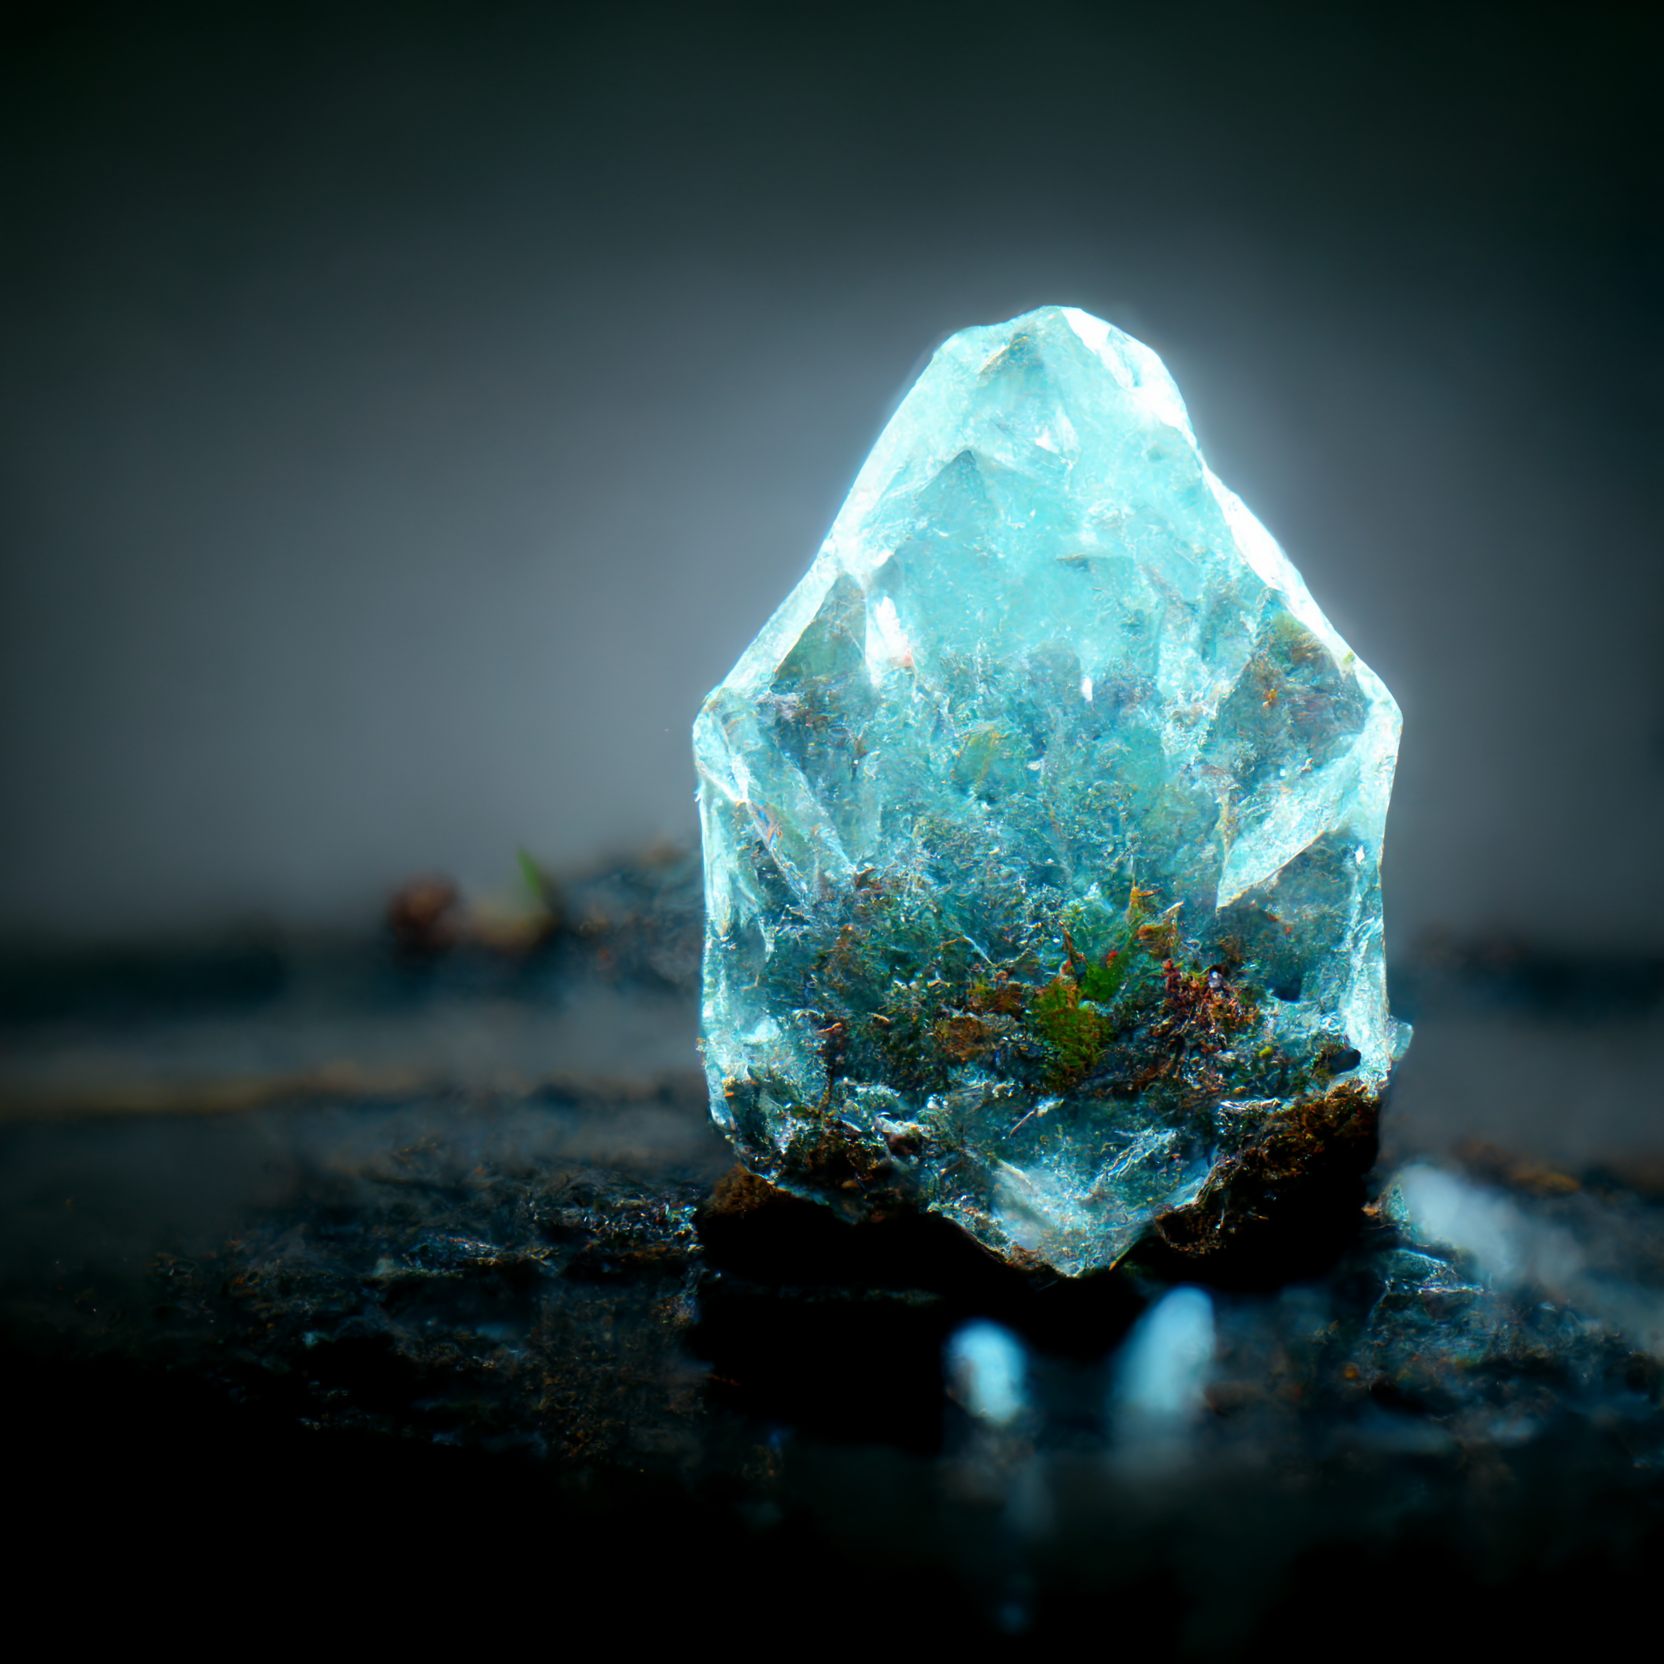 Image of a blue crystal, with moss and dirt surrounding the base, with light shining down from above, illuminating the ground with a blue hue. The surrounding area is out of focus, and consists of a dark rocky ground, and a seemingly gray sky.